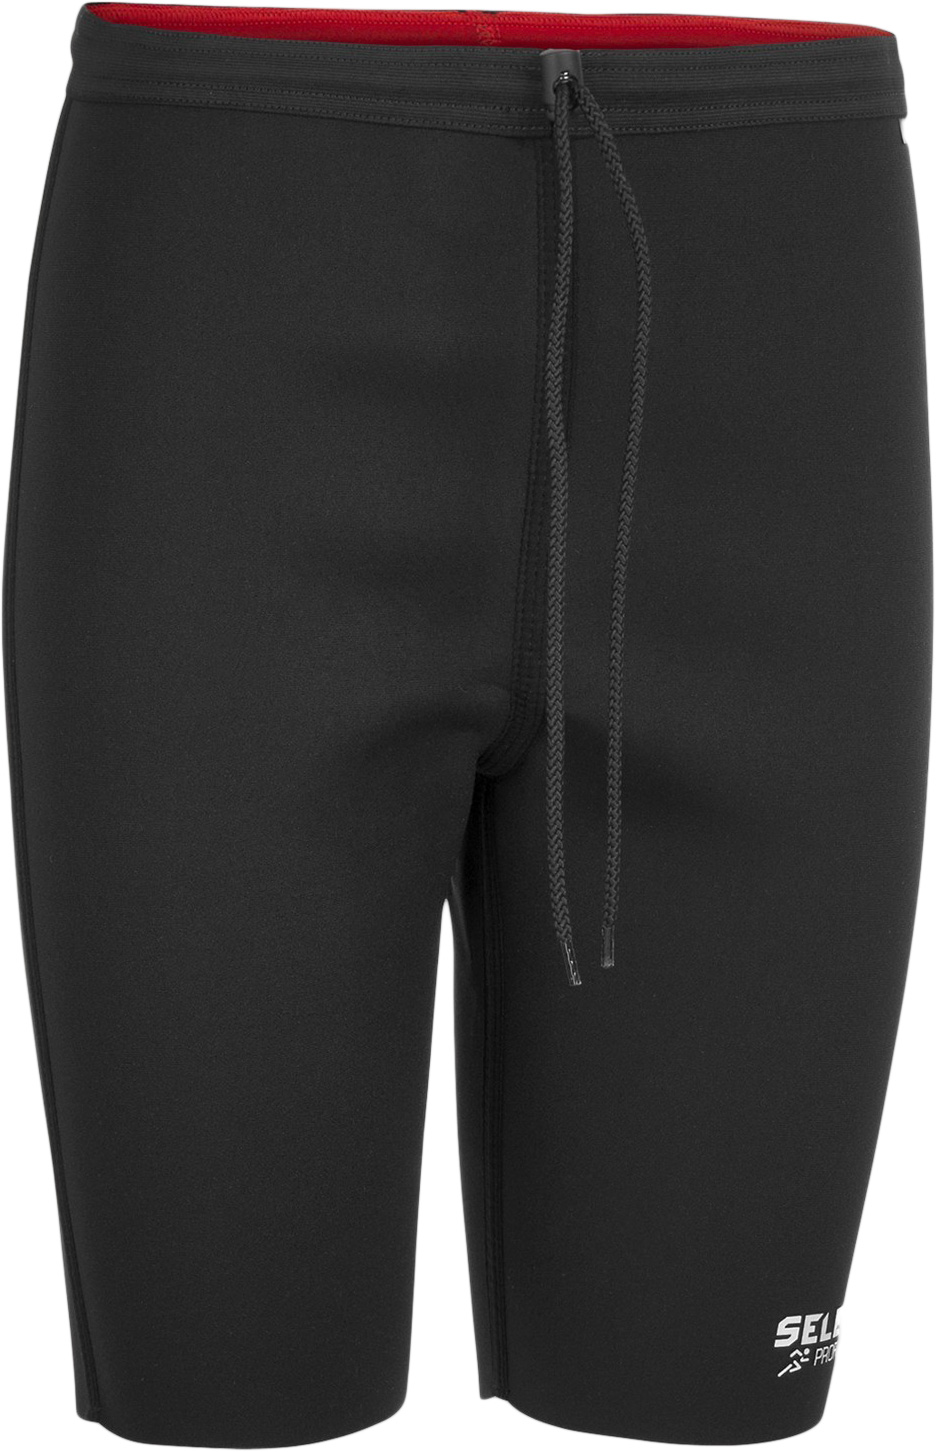 Functional thermal trousers